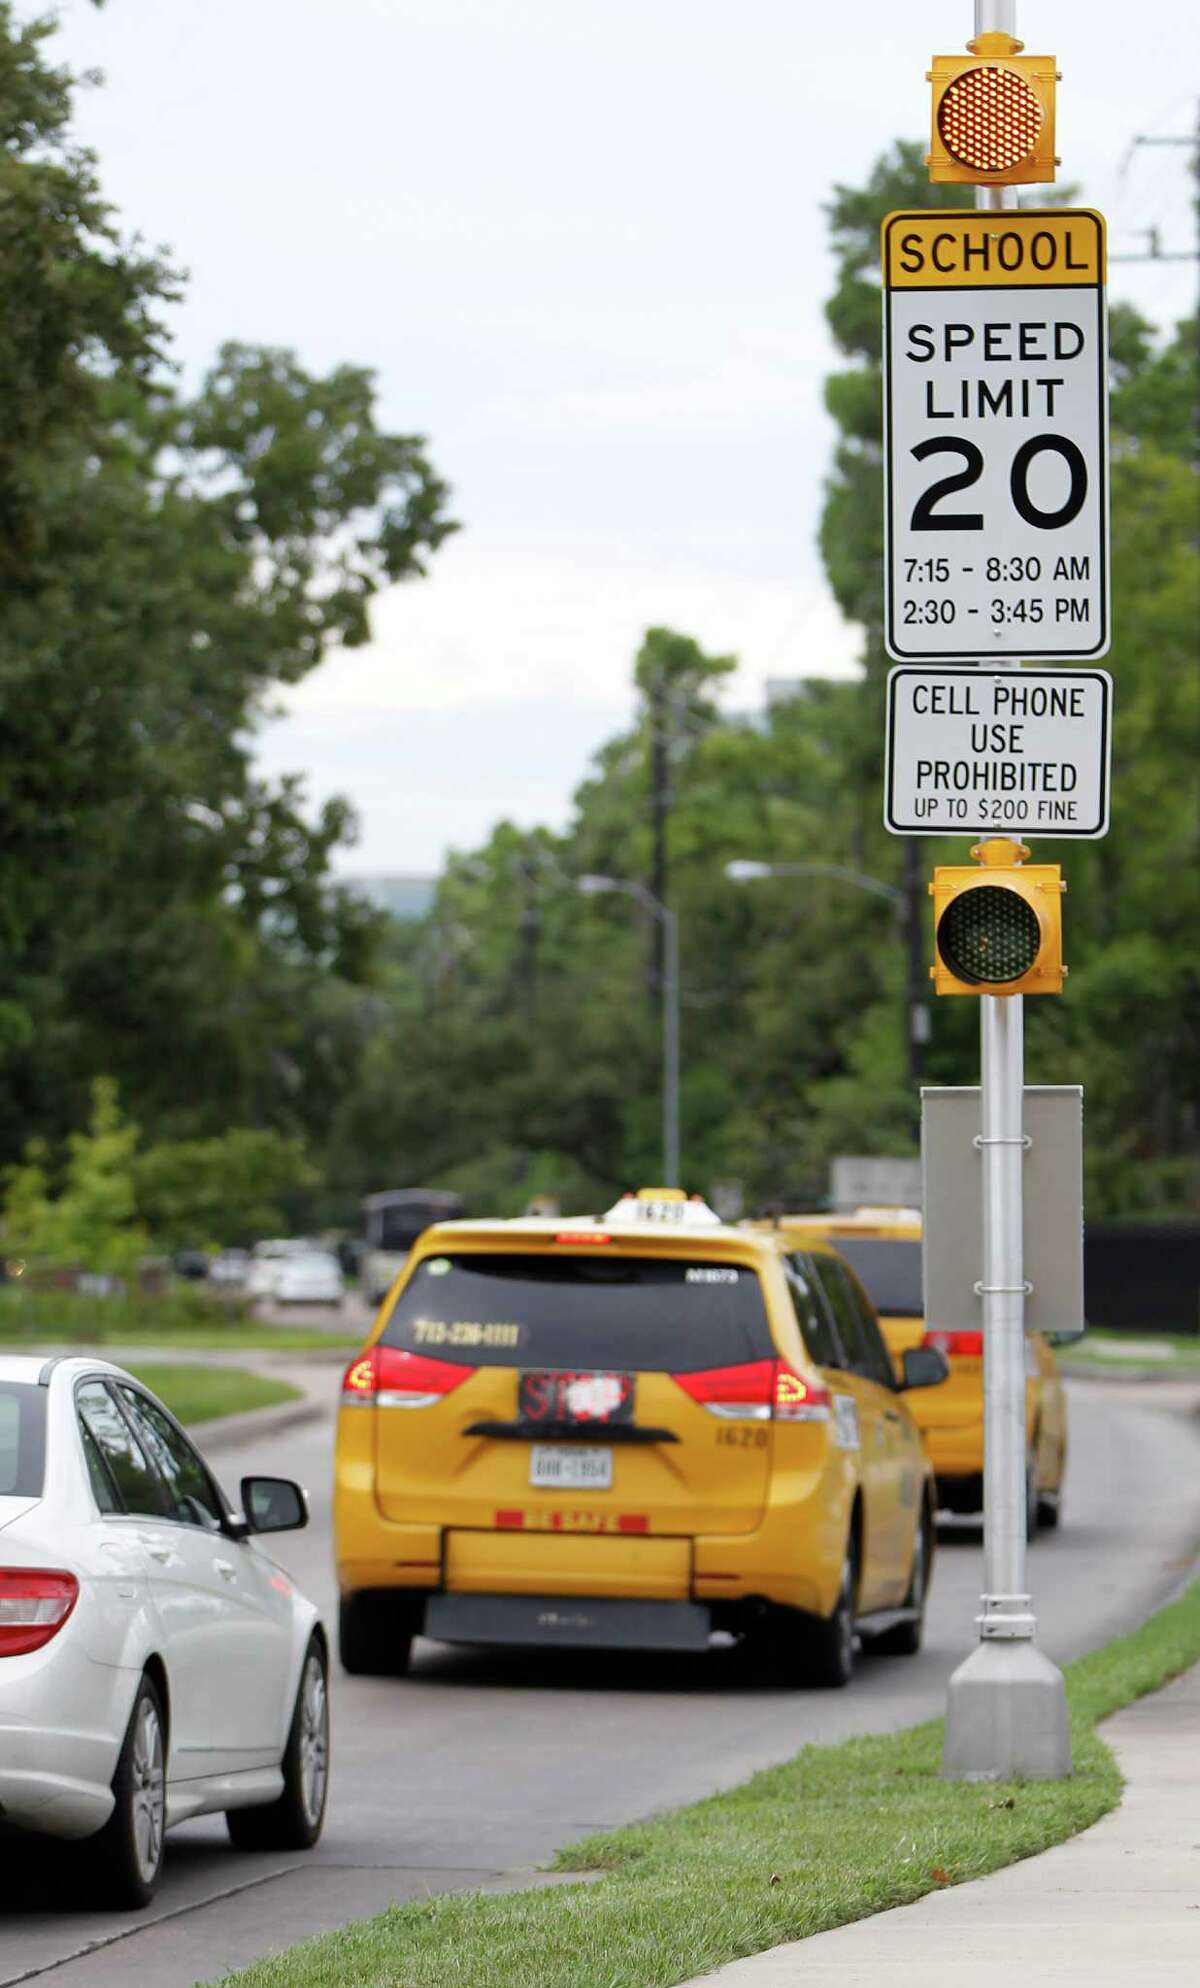 Traffic passes a "cell phone prohibited" sign on Gessner in front of Frostwood Elementary School on Tuesday, Sept. 1, 2015. A 2009 state law prohibits texting and hand-held cell phone use in school zones, but cities must post signs to enforce the ban.